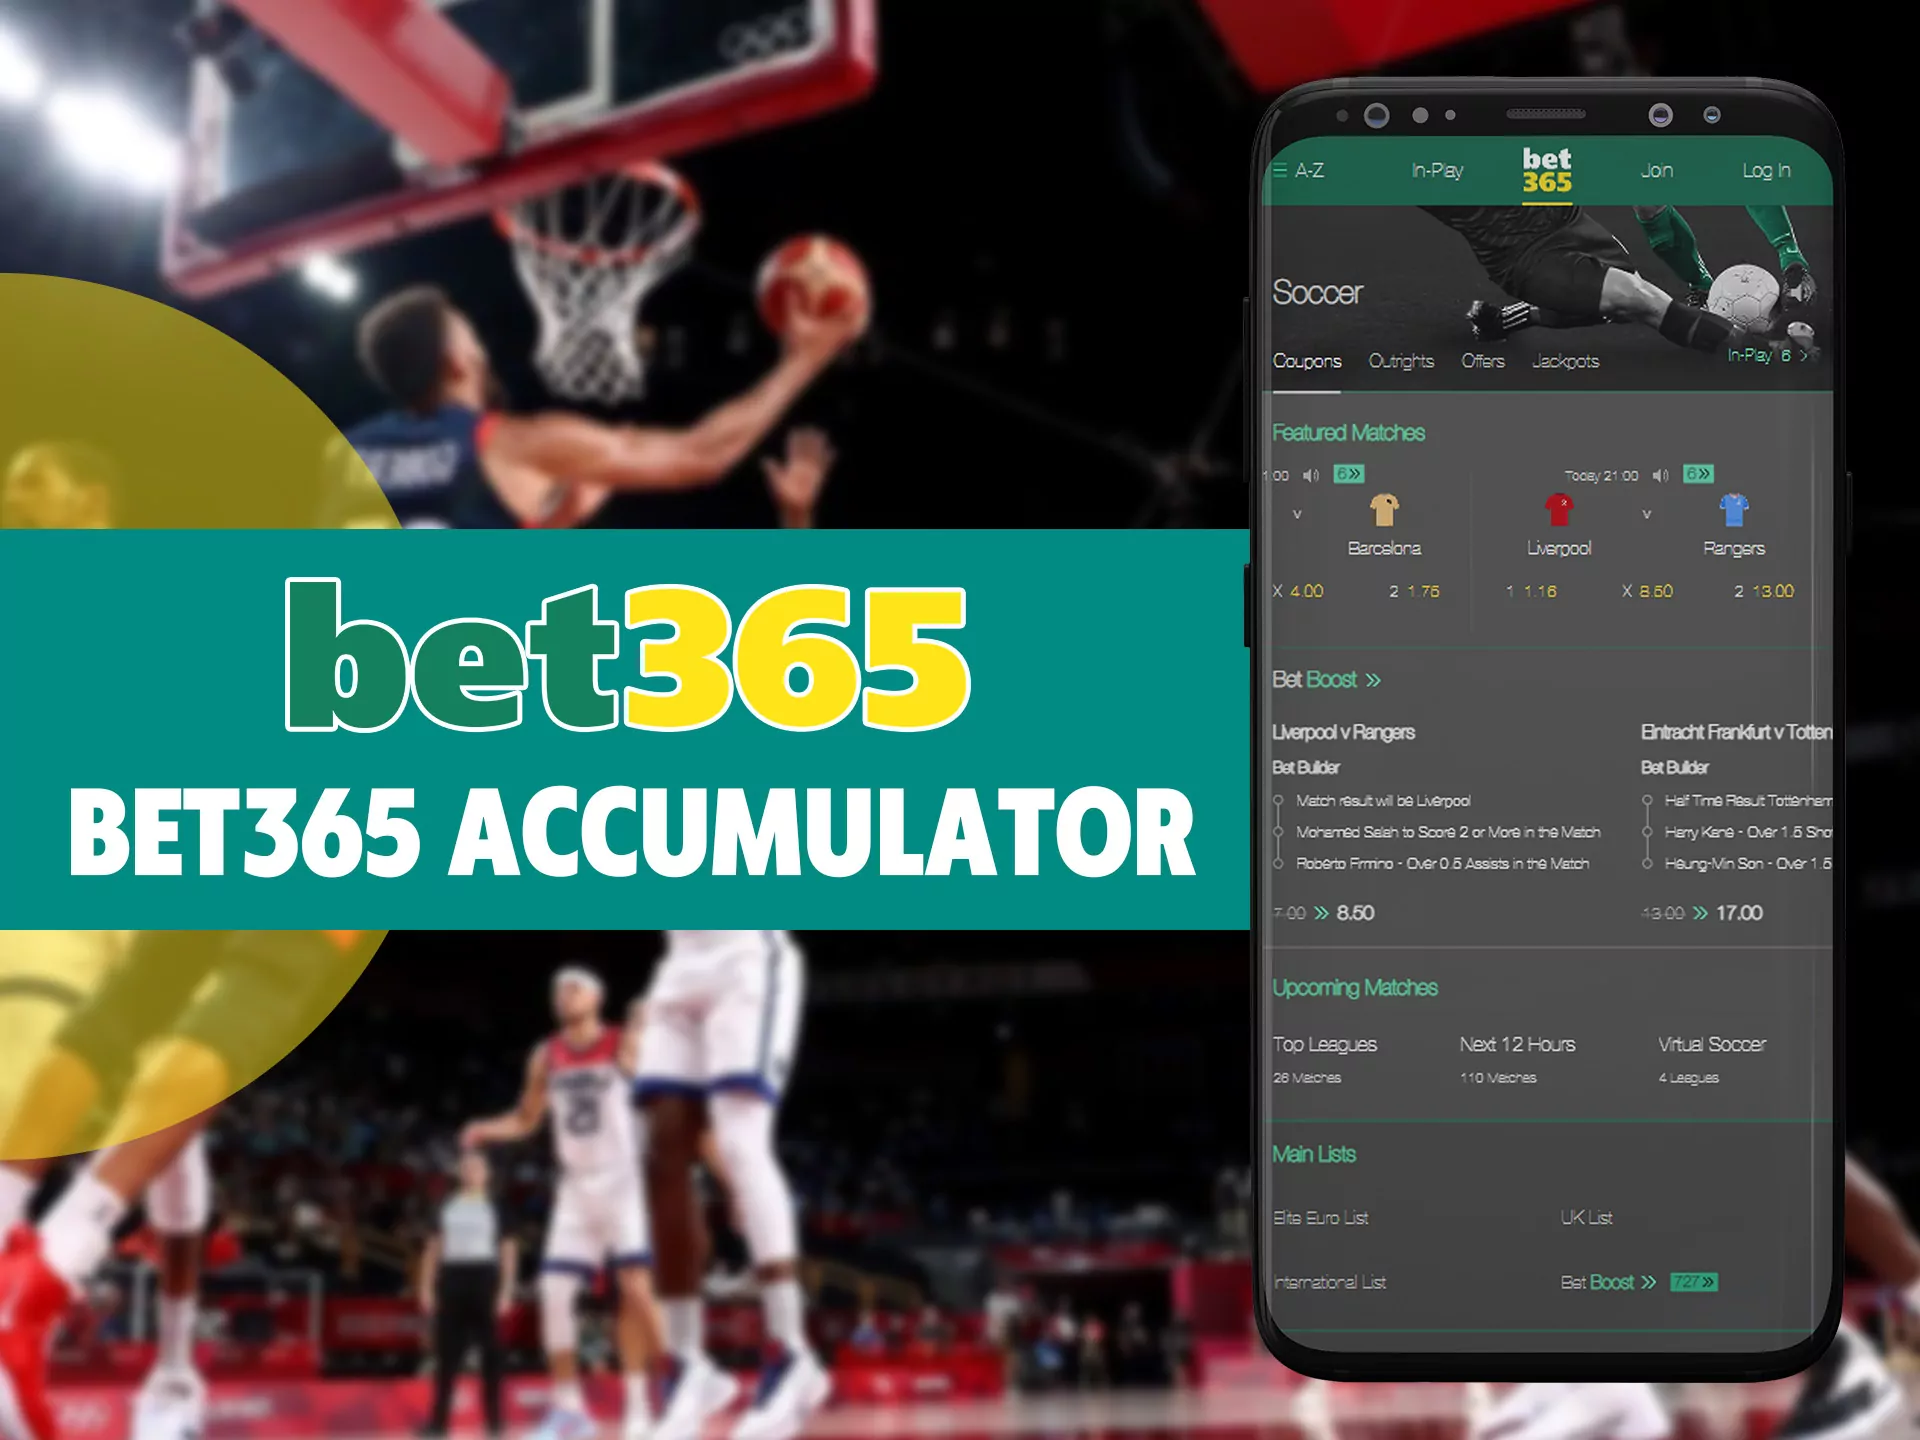 Make multiple bets on sports with Bet365.